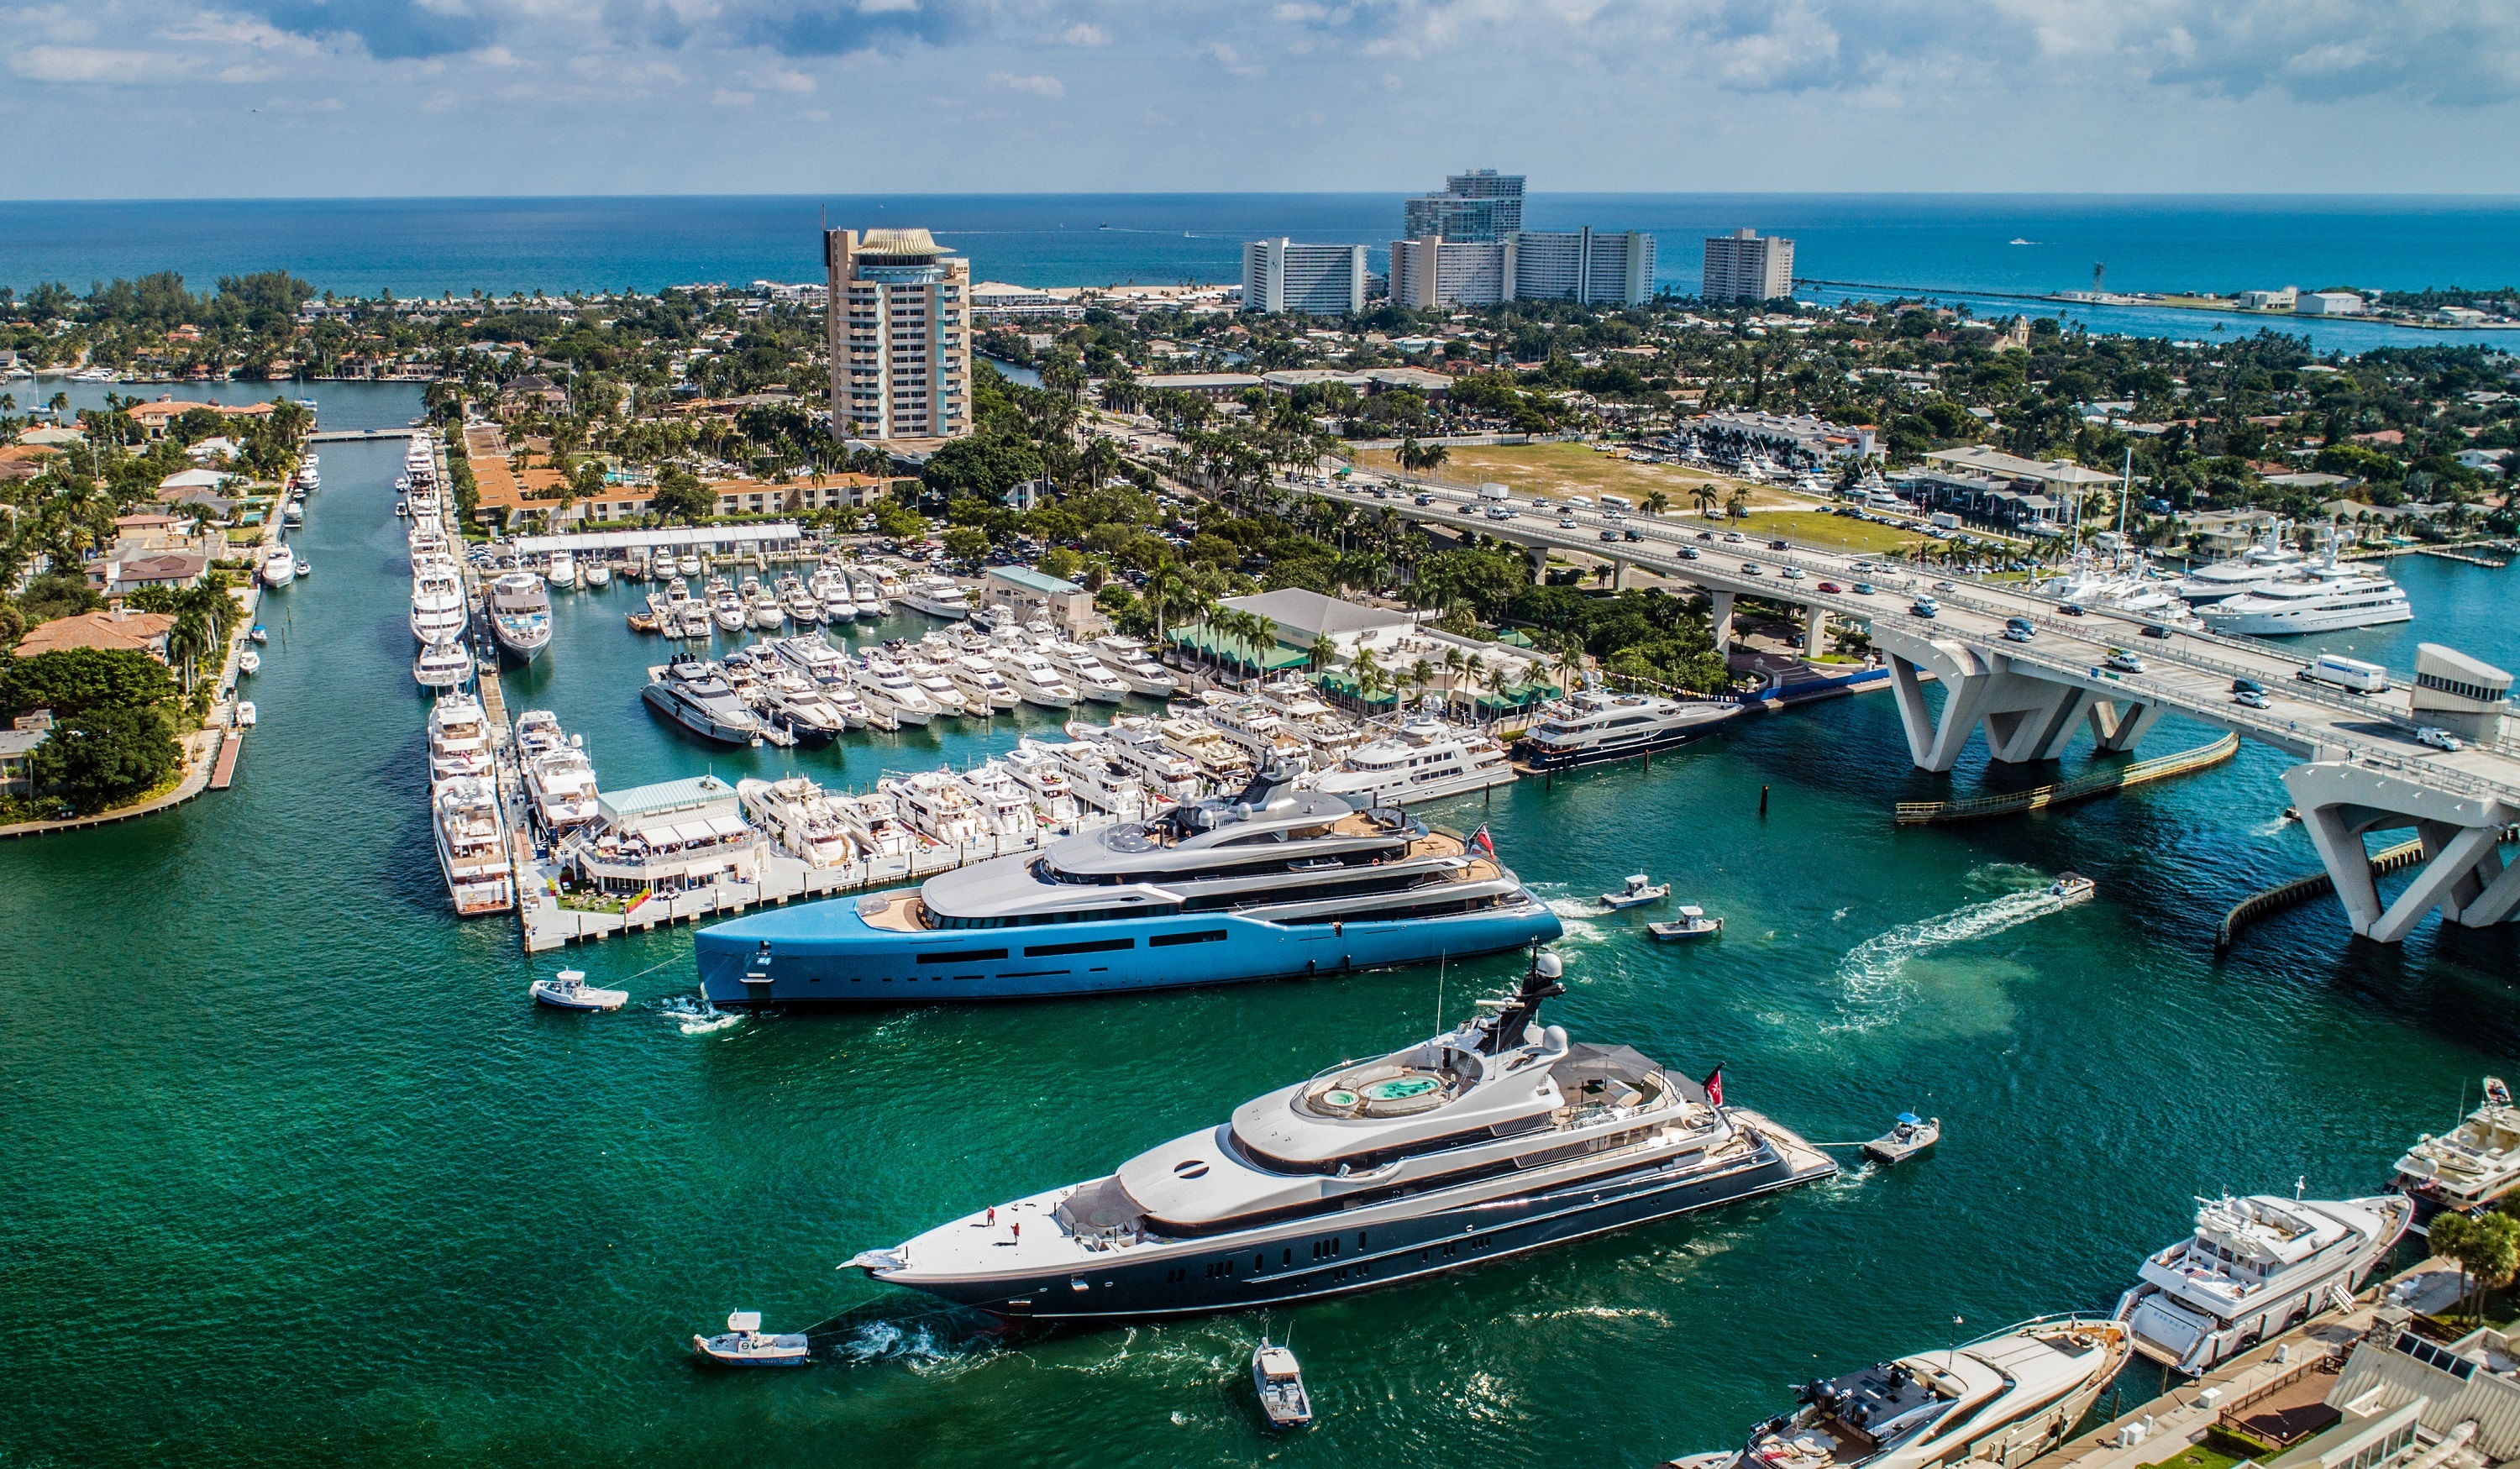 The Fort Lauderdale International Boat Show, the largest in-water boat show in the world, is set to take place Oct. 30 through Nov. 3. Photo Credit: Forest Johnson